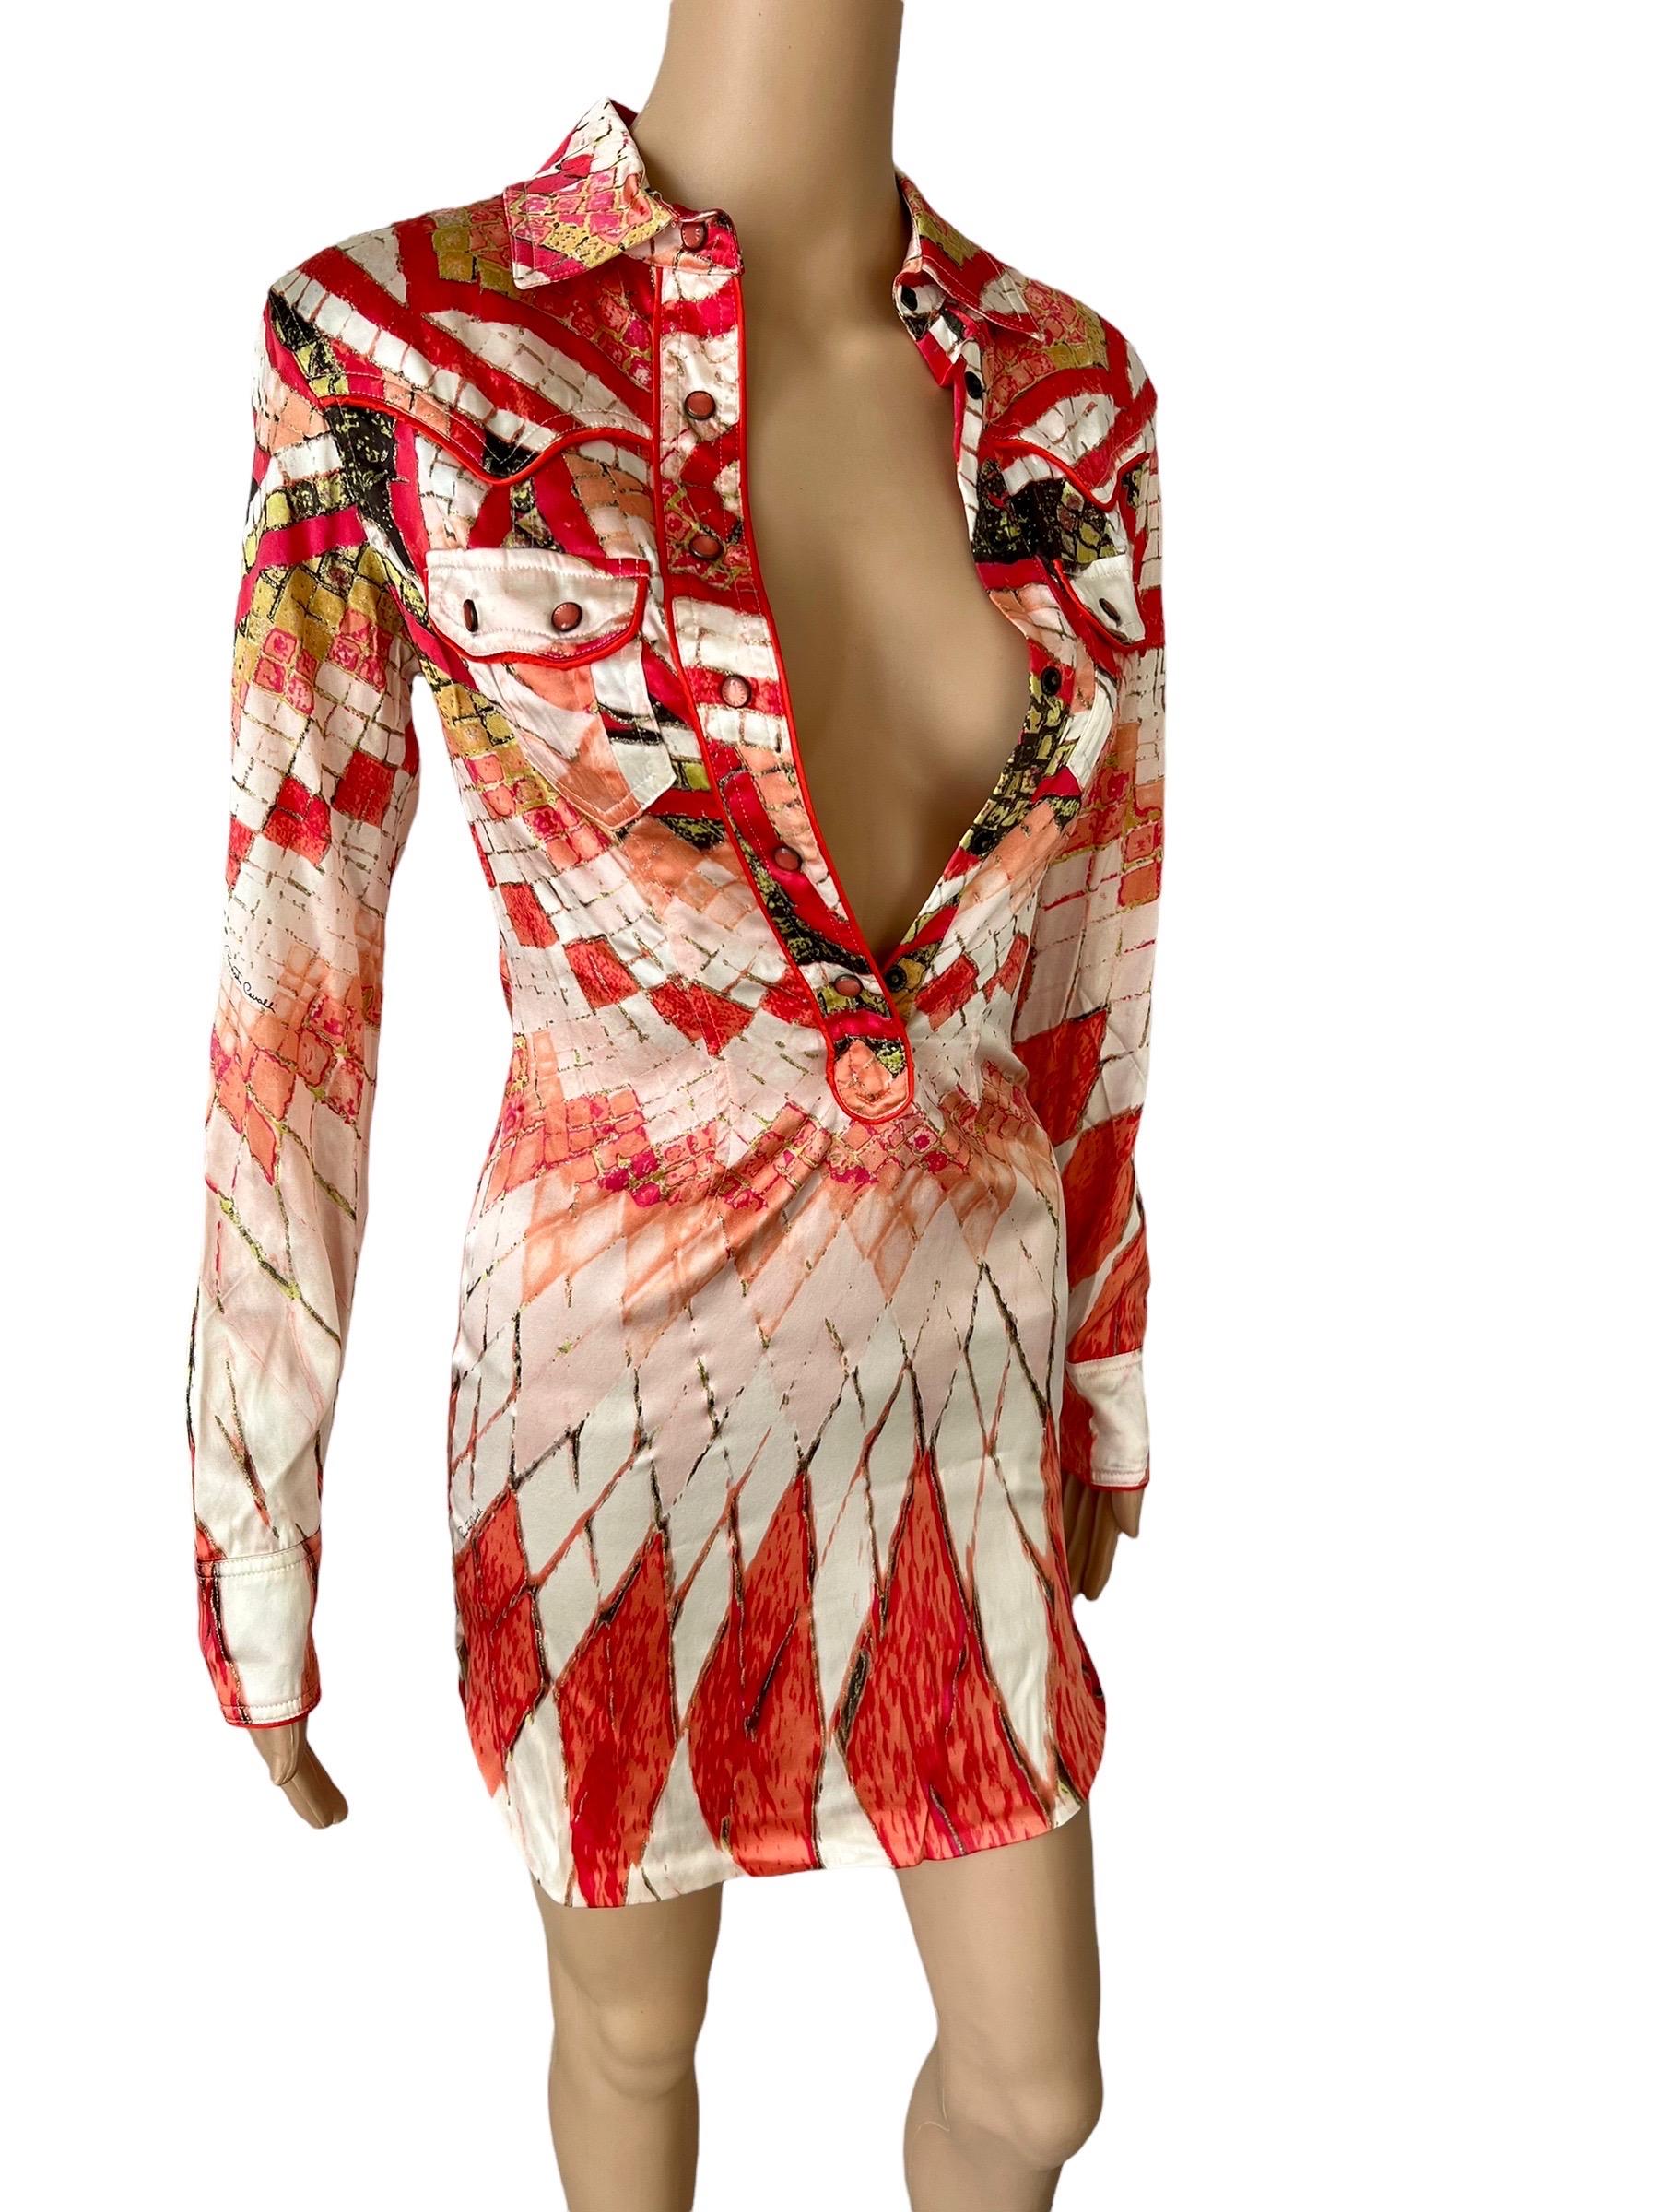 Roberto Cavalli S/S 2004 Runway Plunging Neckline Button Up Silk Mini Shirt Dress Size XS/S

Look 68 from the Spring 2004 Collection.

Please note size tag has been removed.